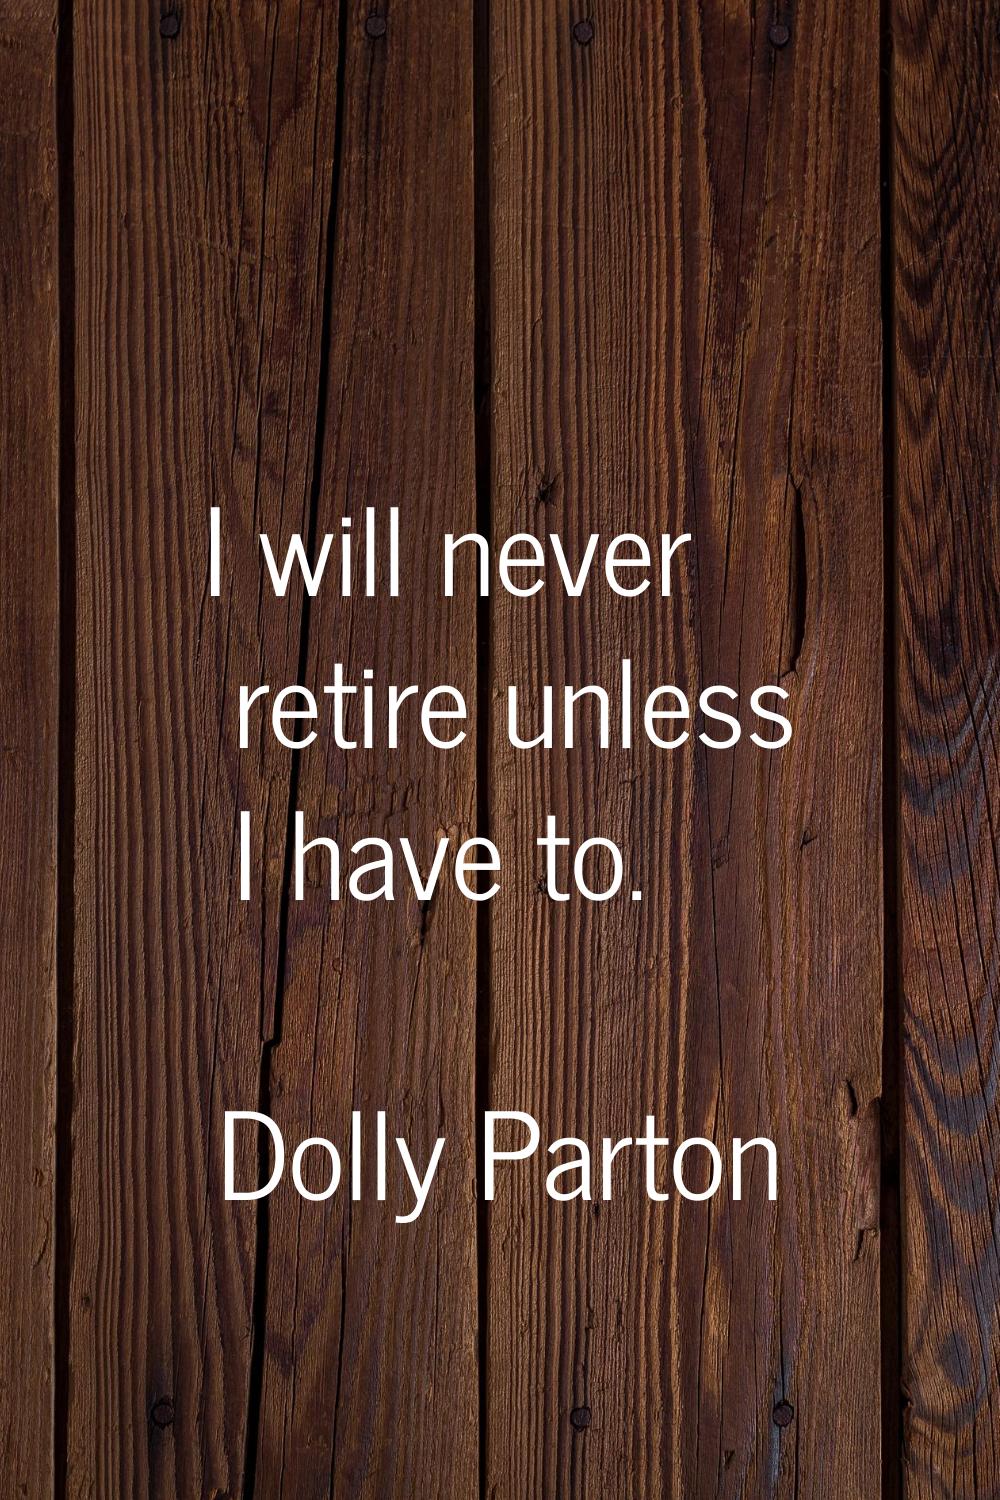 I will never retire unless I have to.